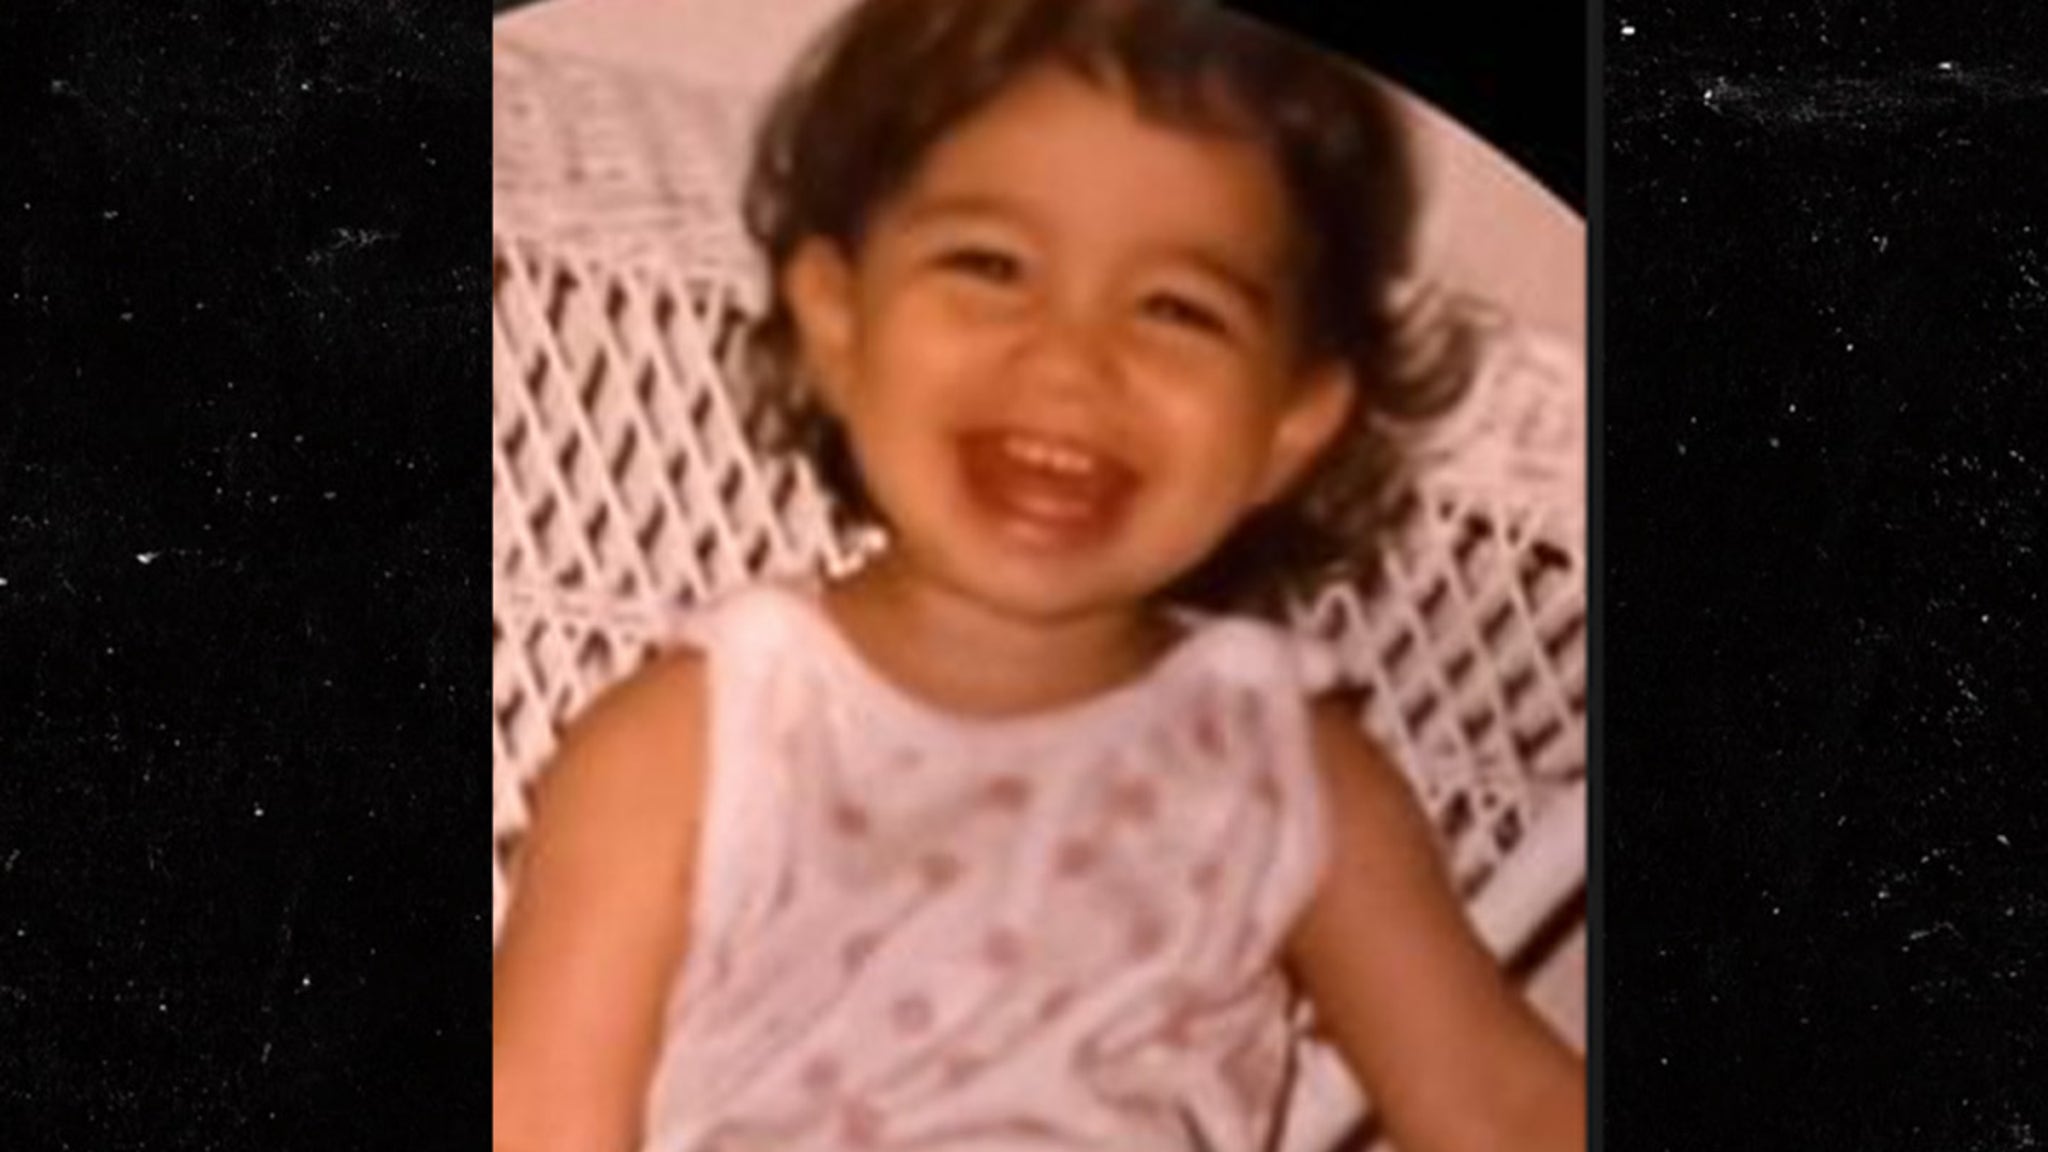 Guess Who This Smiling Sweetie Turned Into!